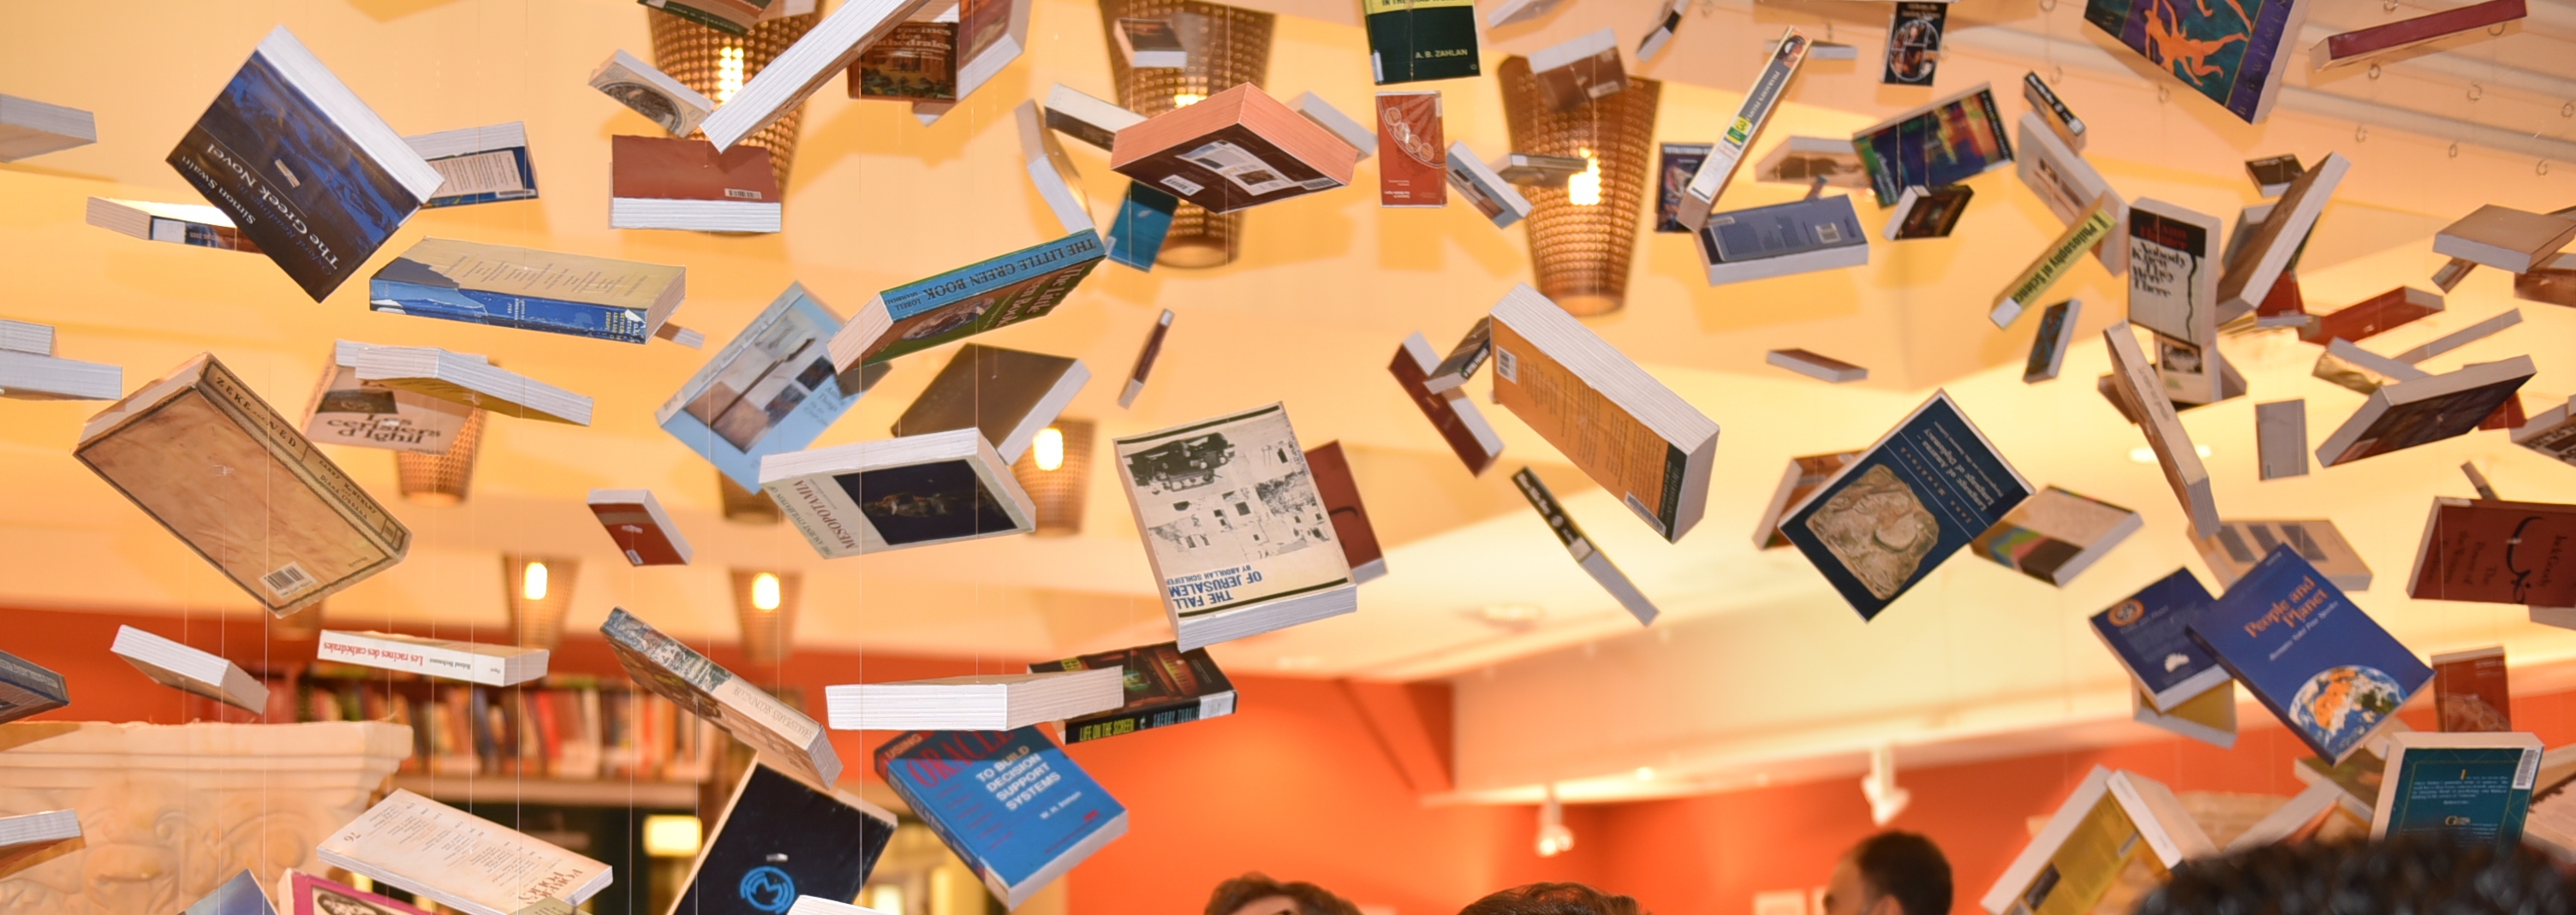 Al-Mutannabbi Street exhibition at the Rare Books and Special Collections Library in 2014 with books suspended in the air.